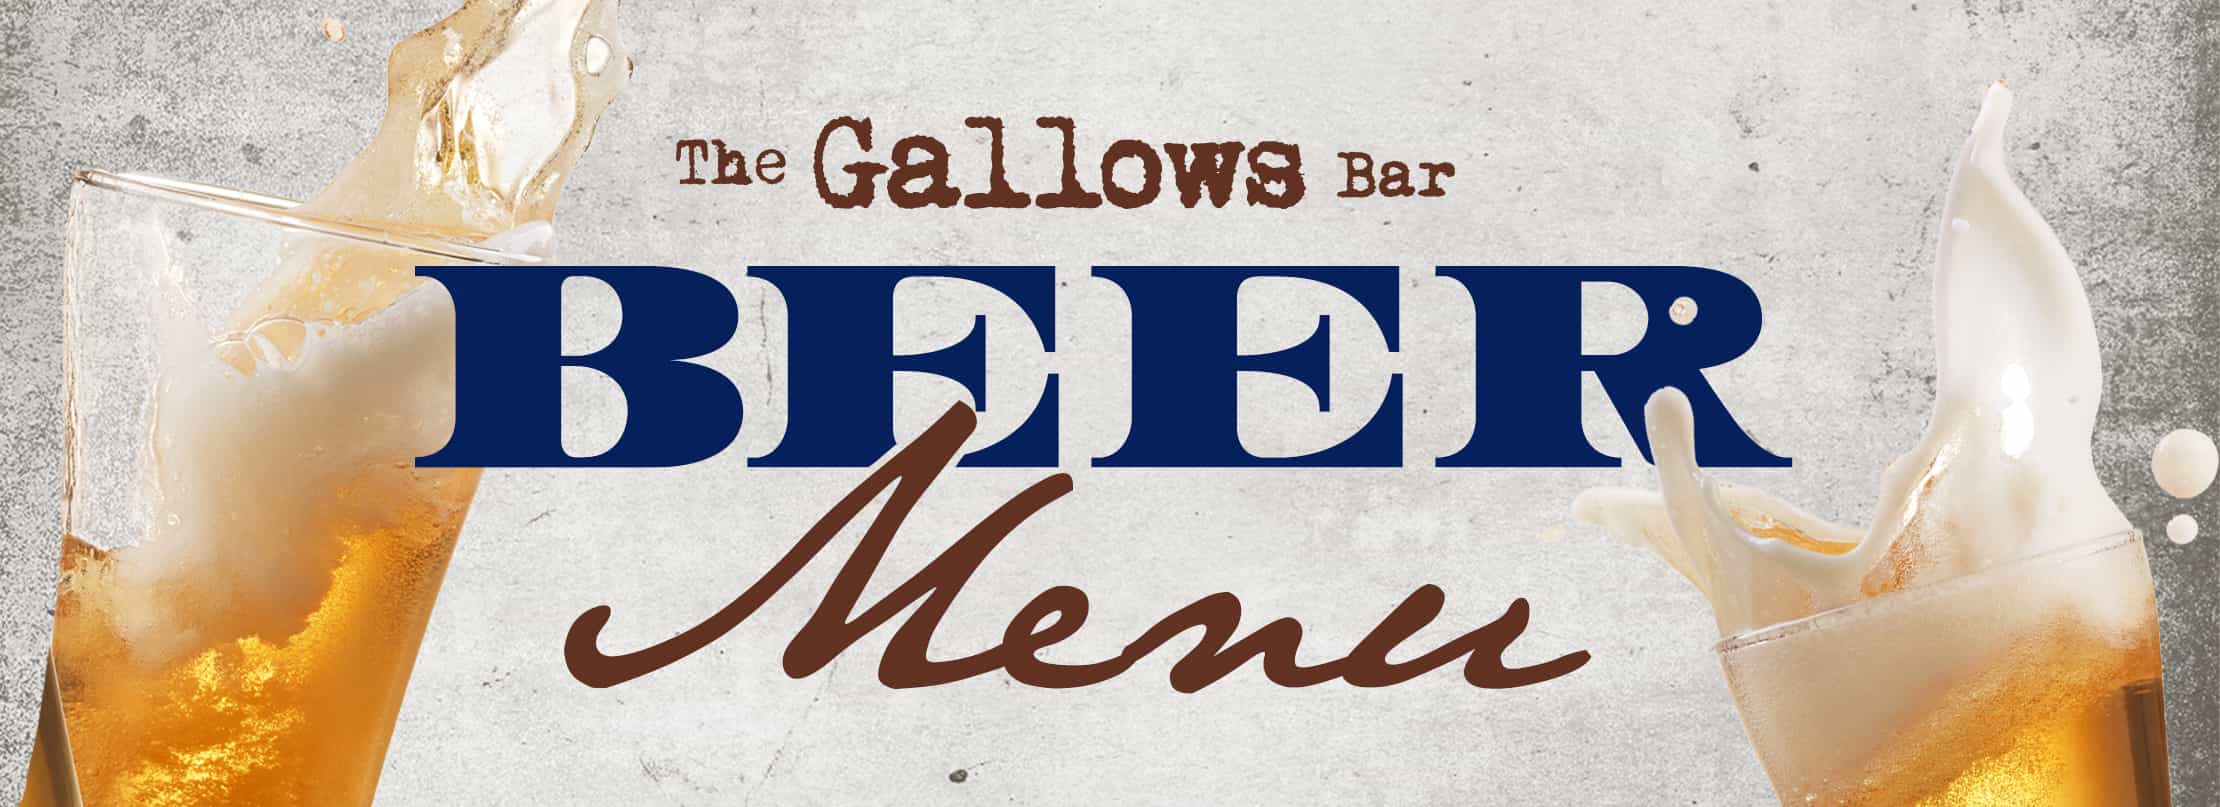 Gallows Beers